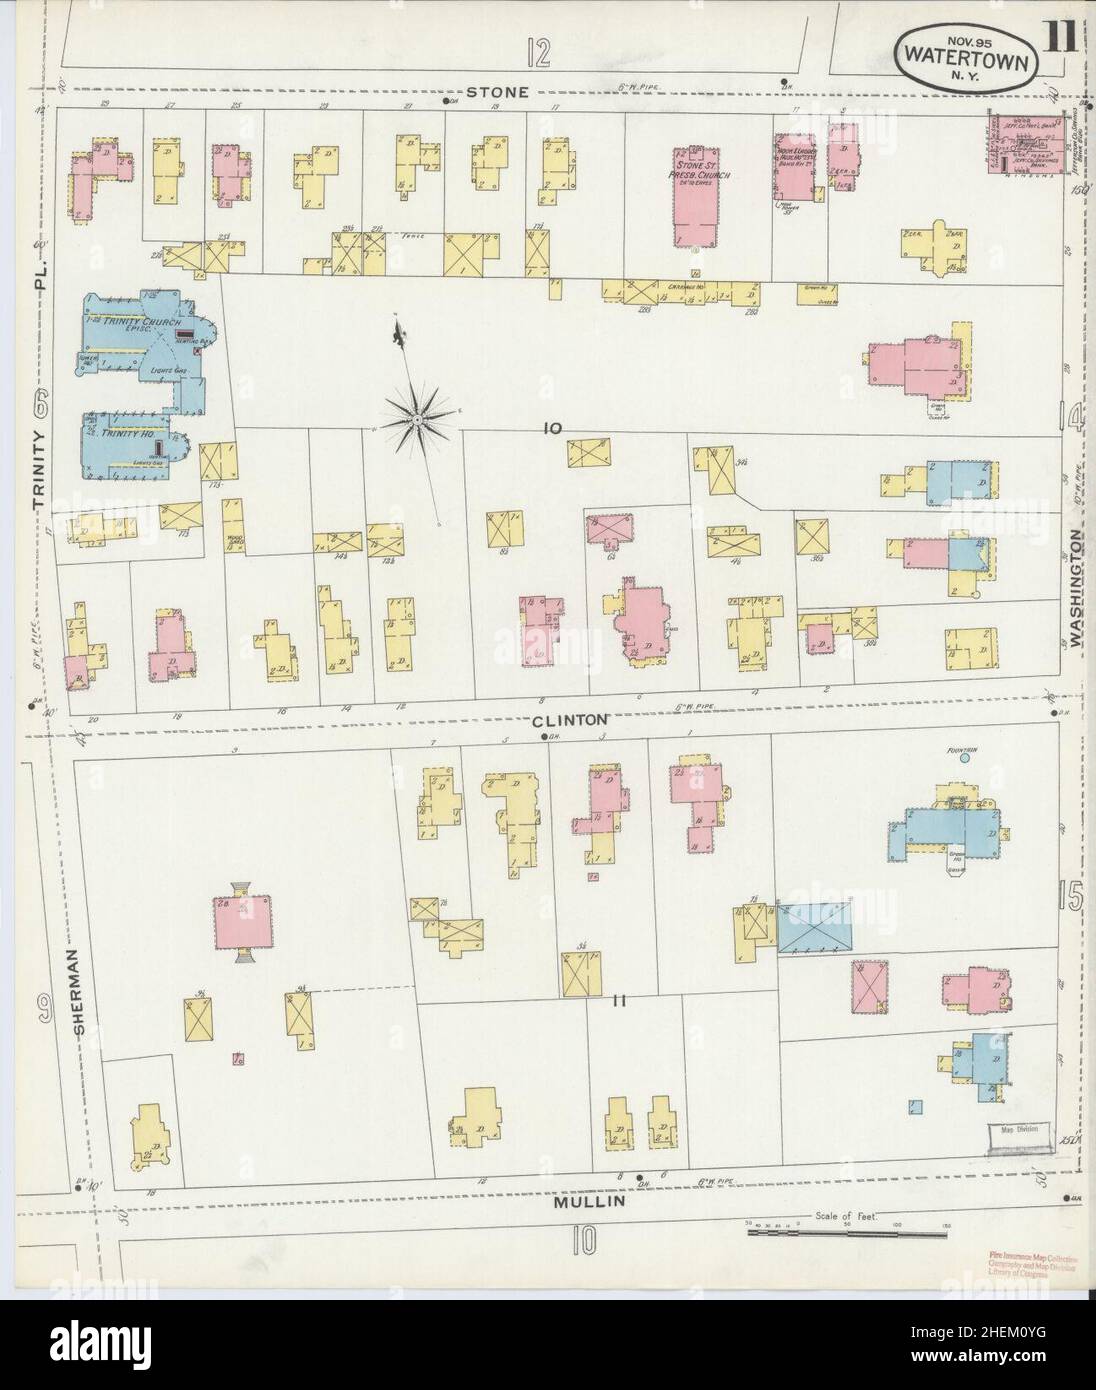 Sanborn Fire Insurance Map from Watertown, Jefferson County, New York. Stock Photo